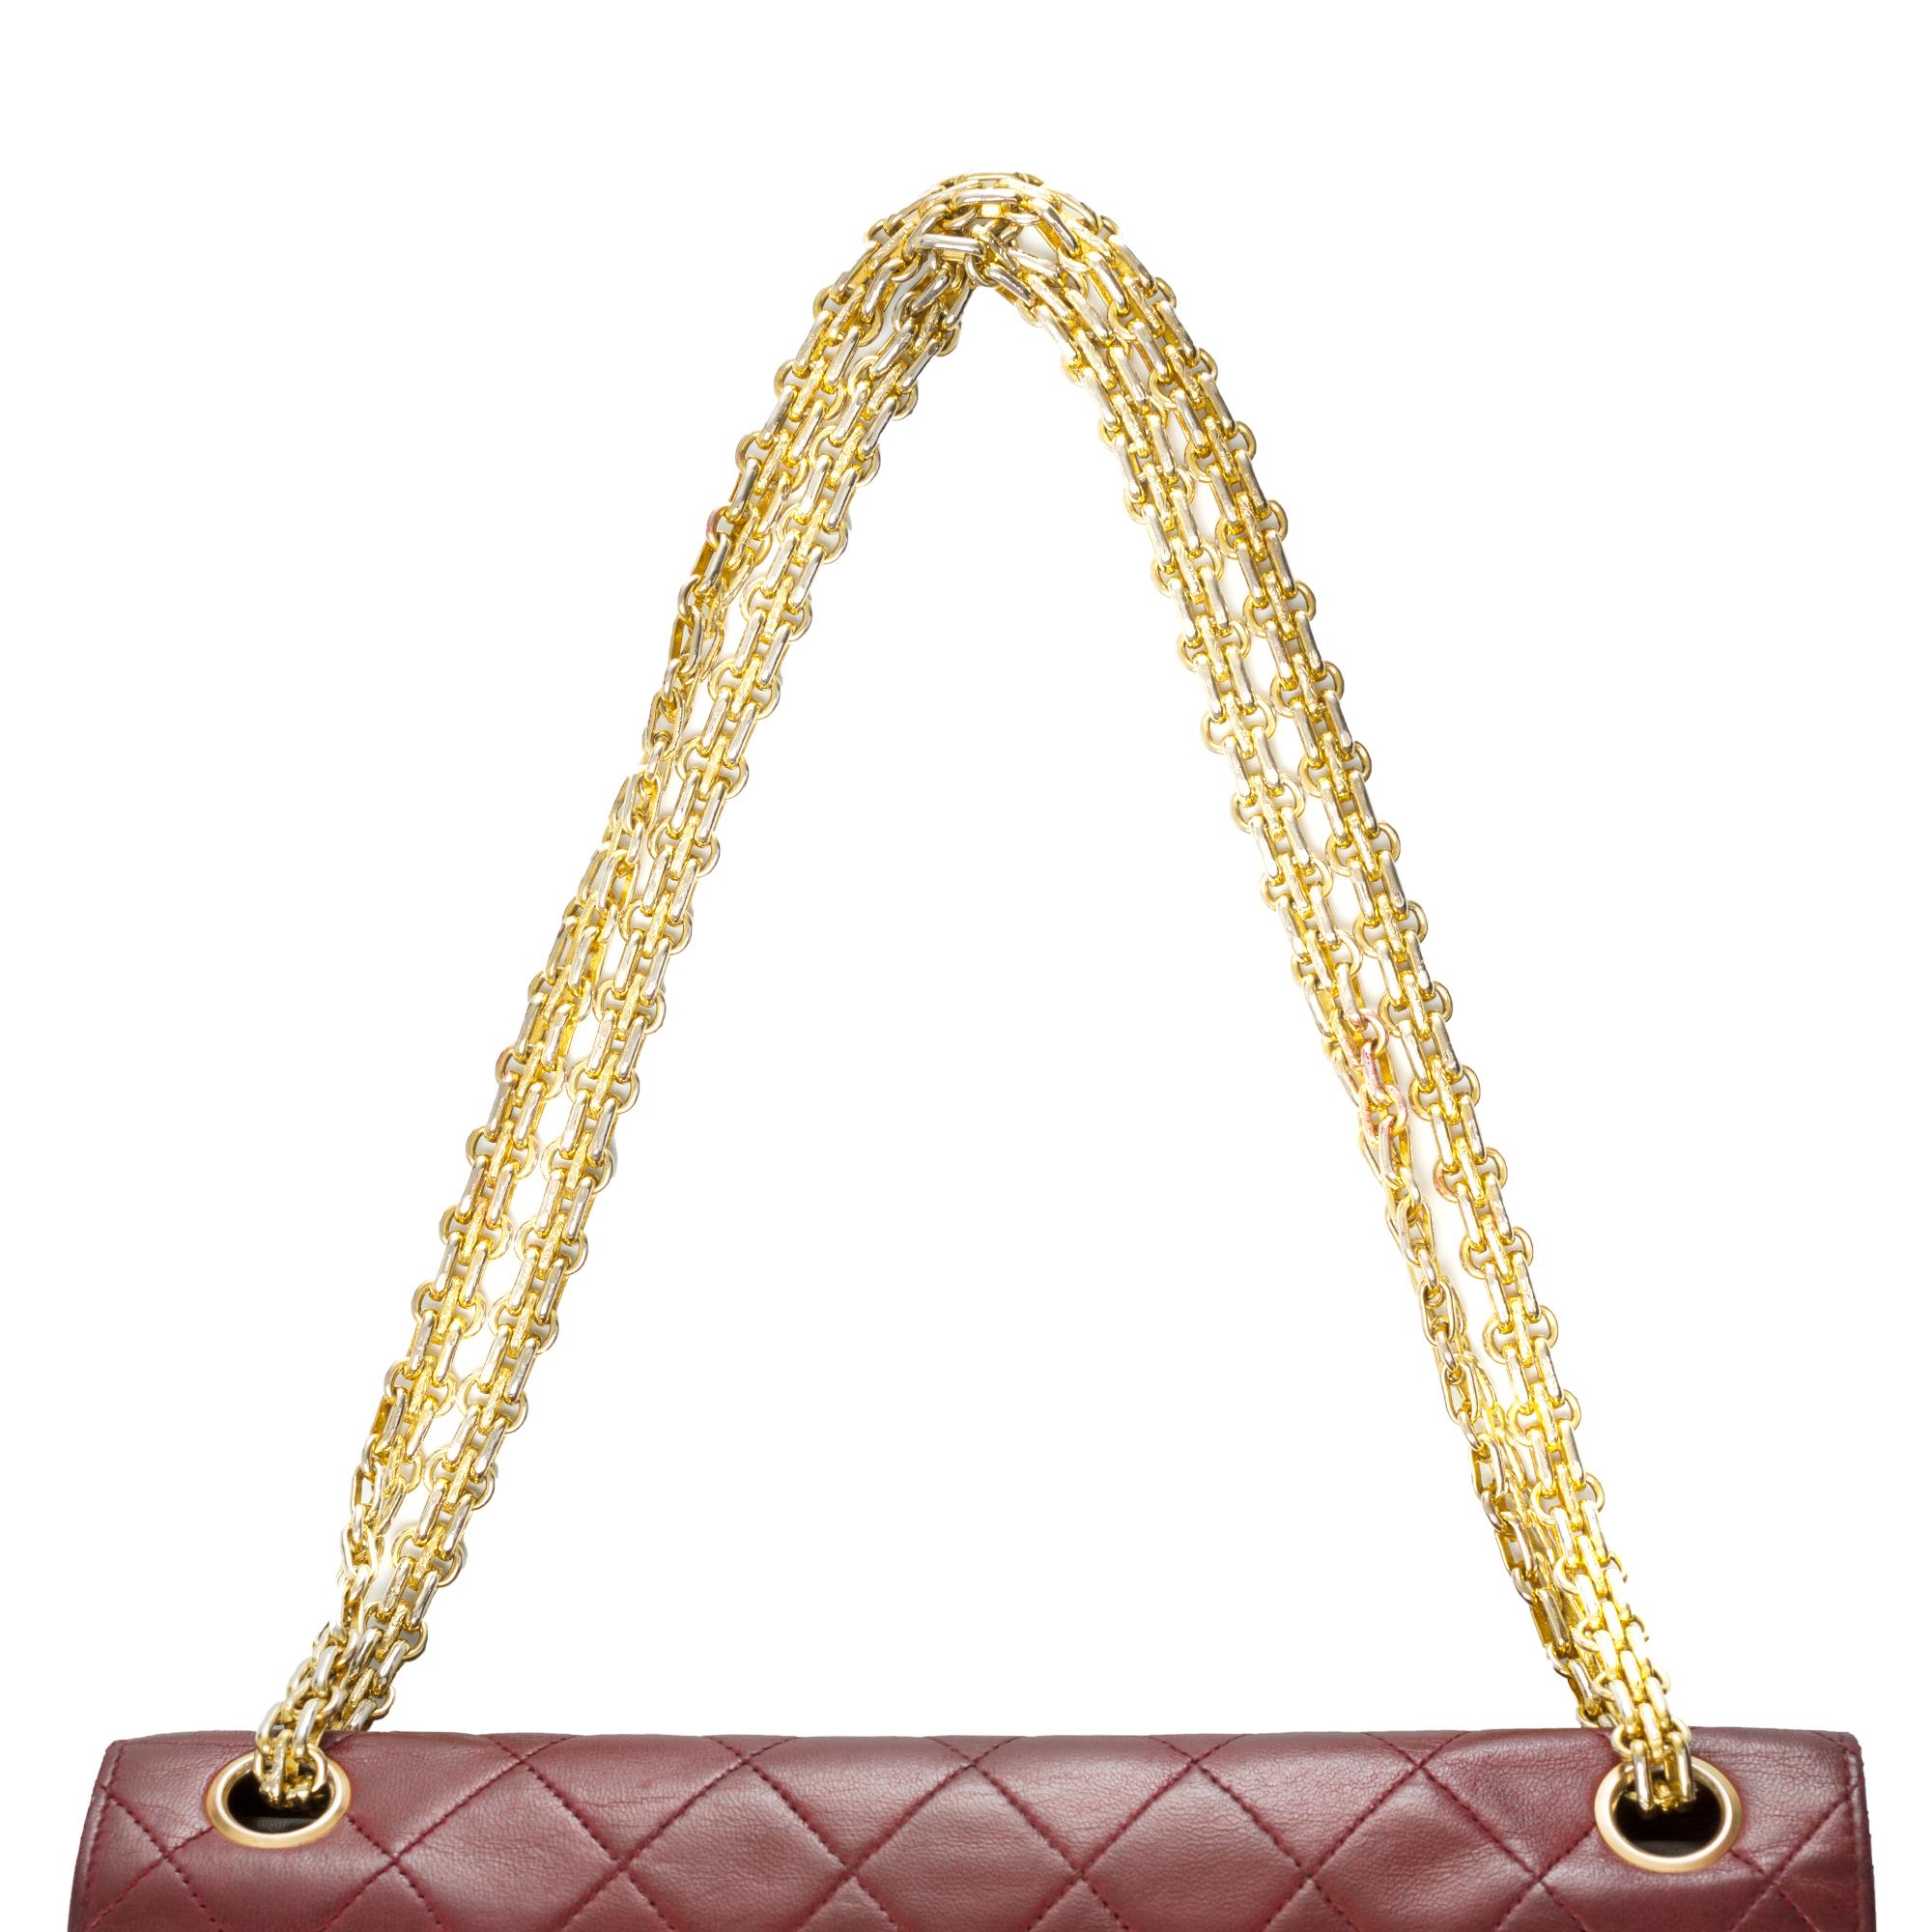 Chanel Timeless shoulder bag in burgundy quilted leather with gold hardware 2